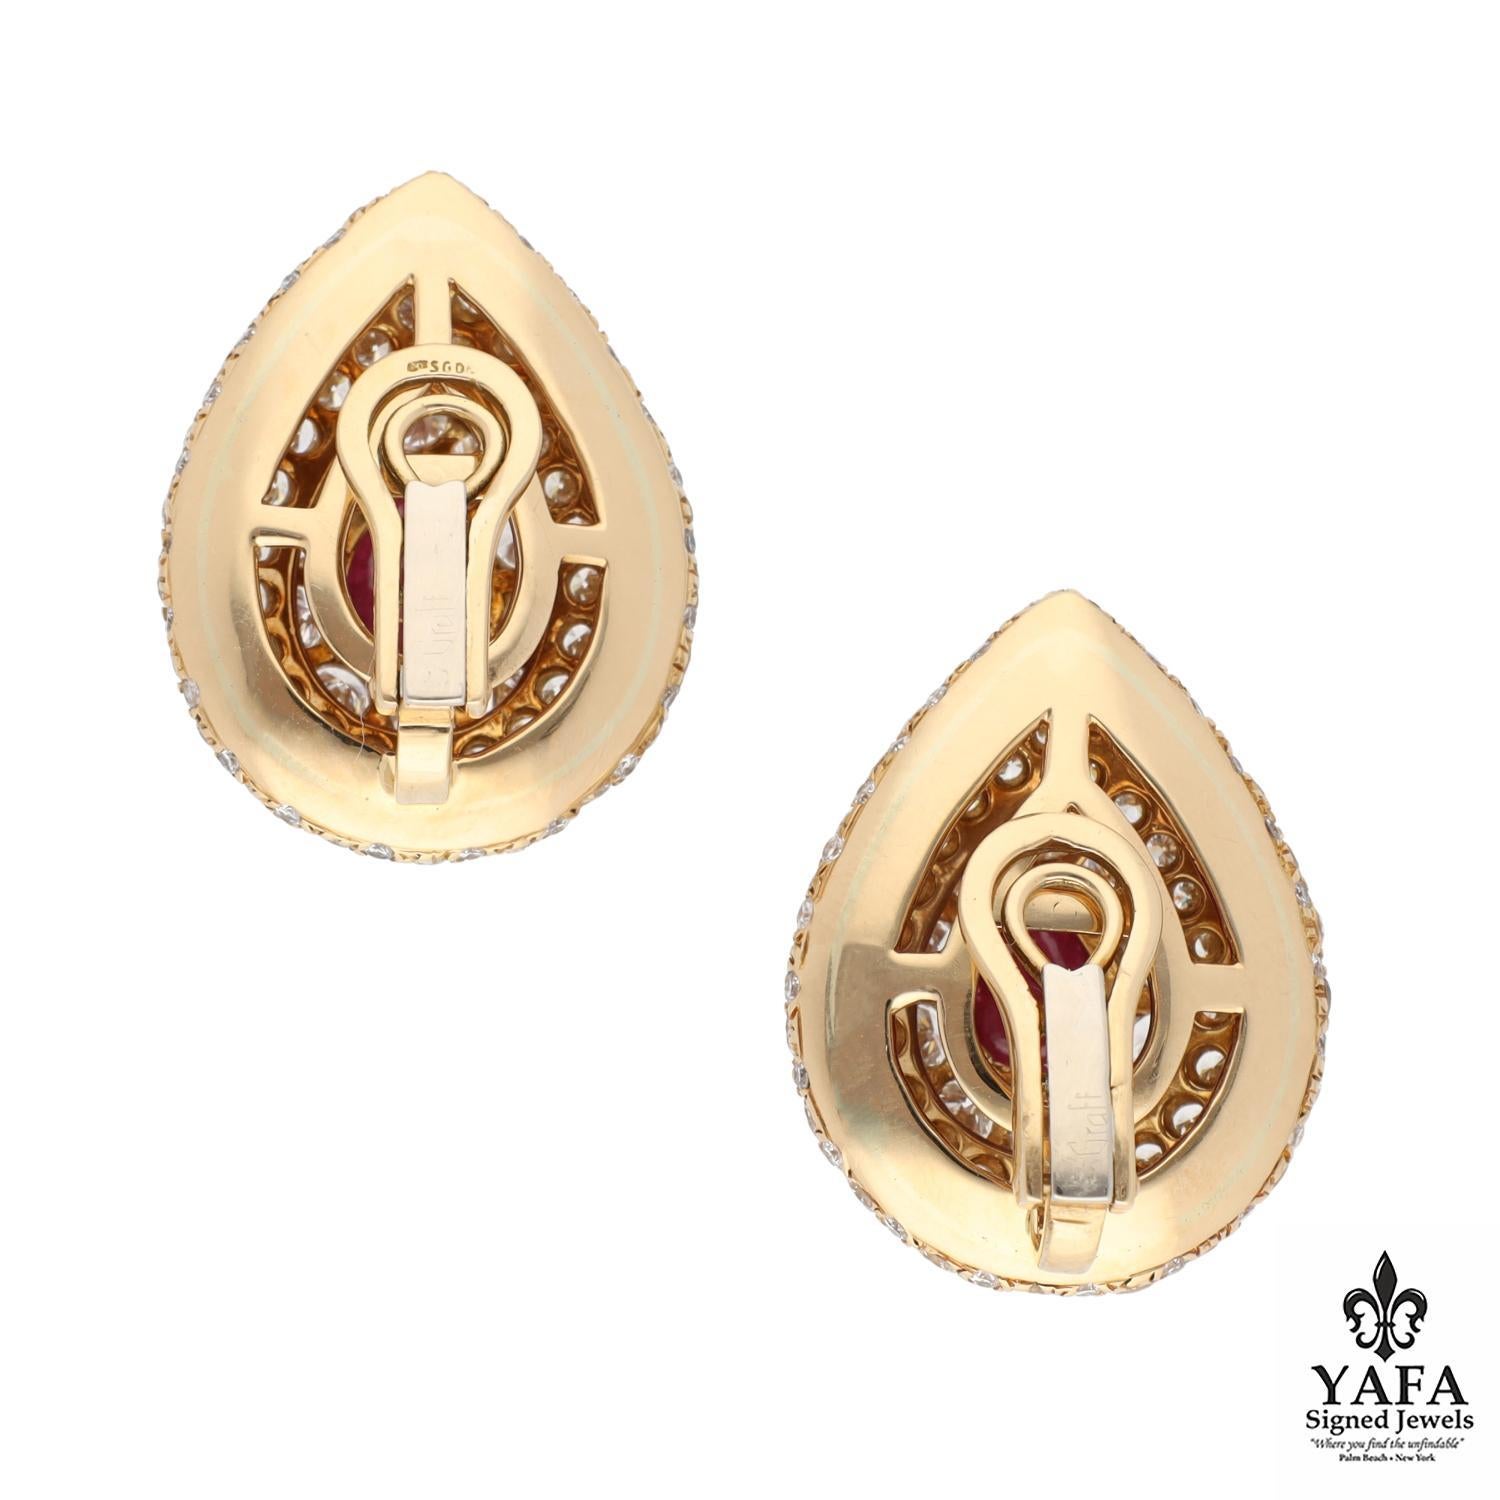 GRAFF 18K Gold Cabochon Pear Shaped Ruby and Diamond Button Ear Clips. 
Approximate Diamond Weight - 12.00 CTS
Approximate Ruby Weight - 3.00 CTS
Circa - 1980's
Approximate Length - 1.20